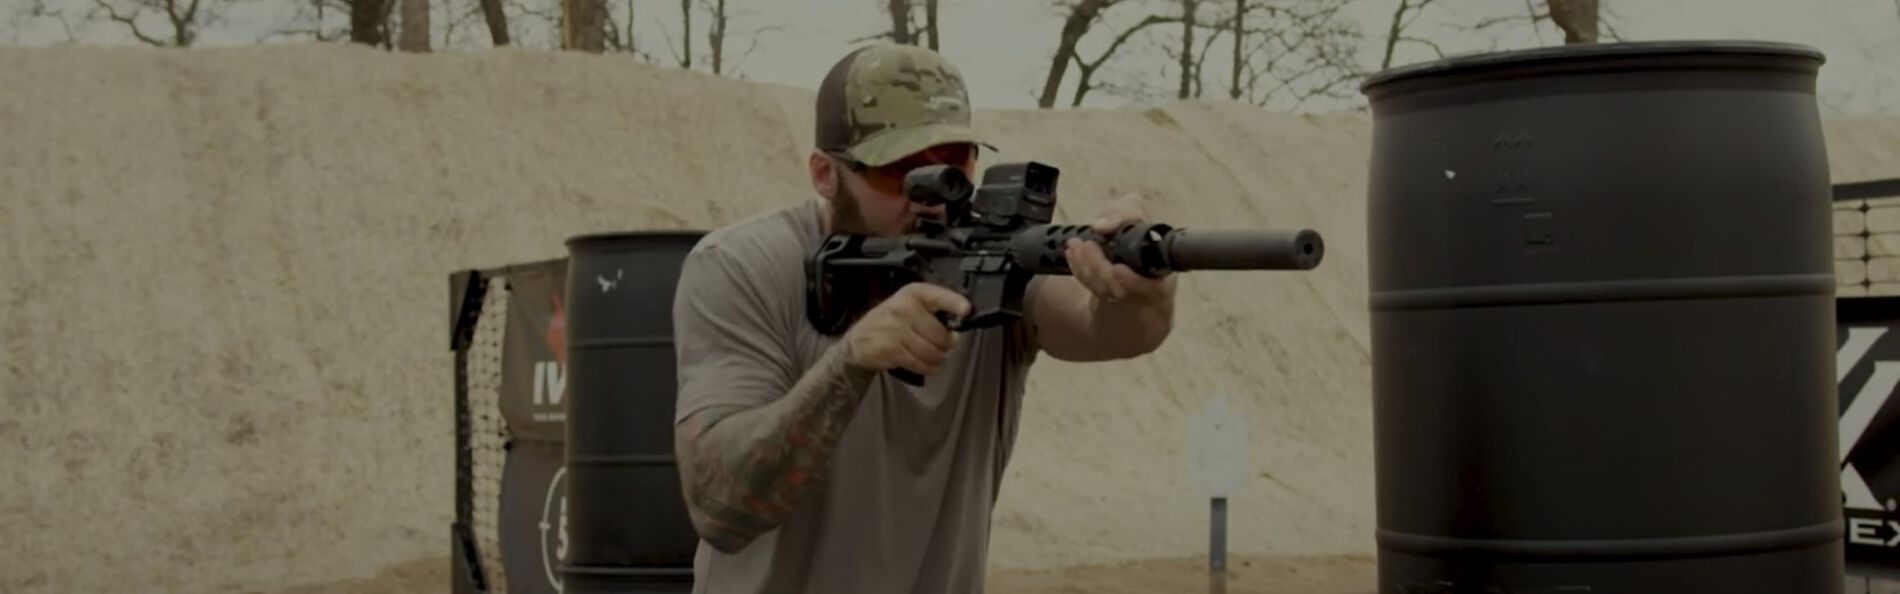 Josh Froelich holding a rifle at an outdoor range